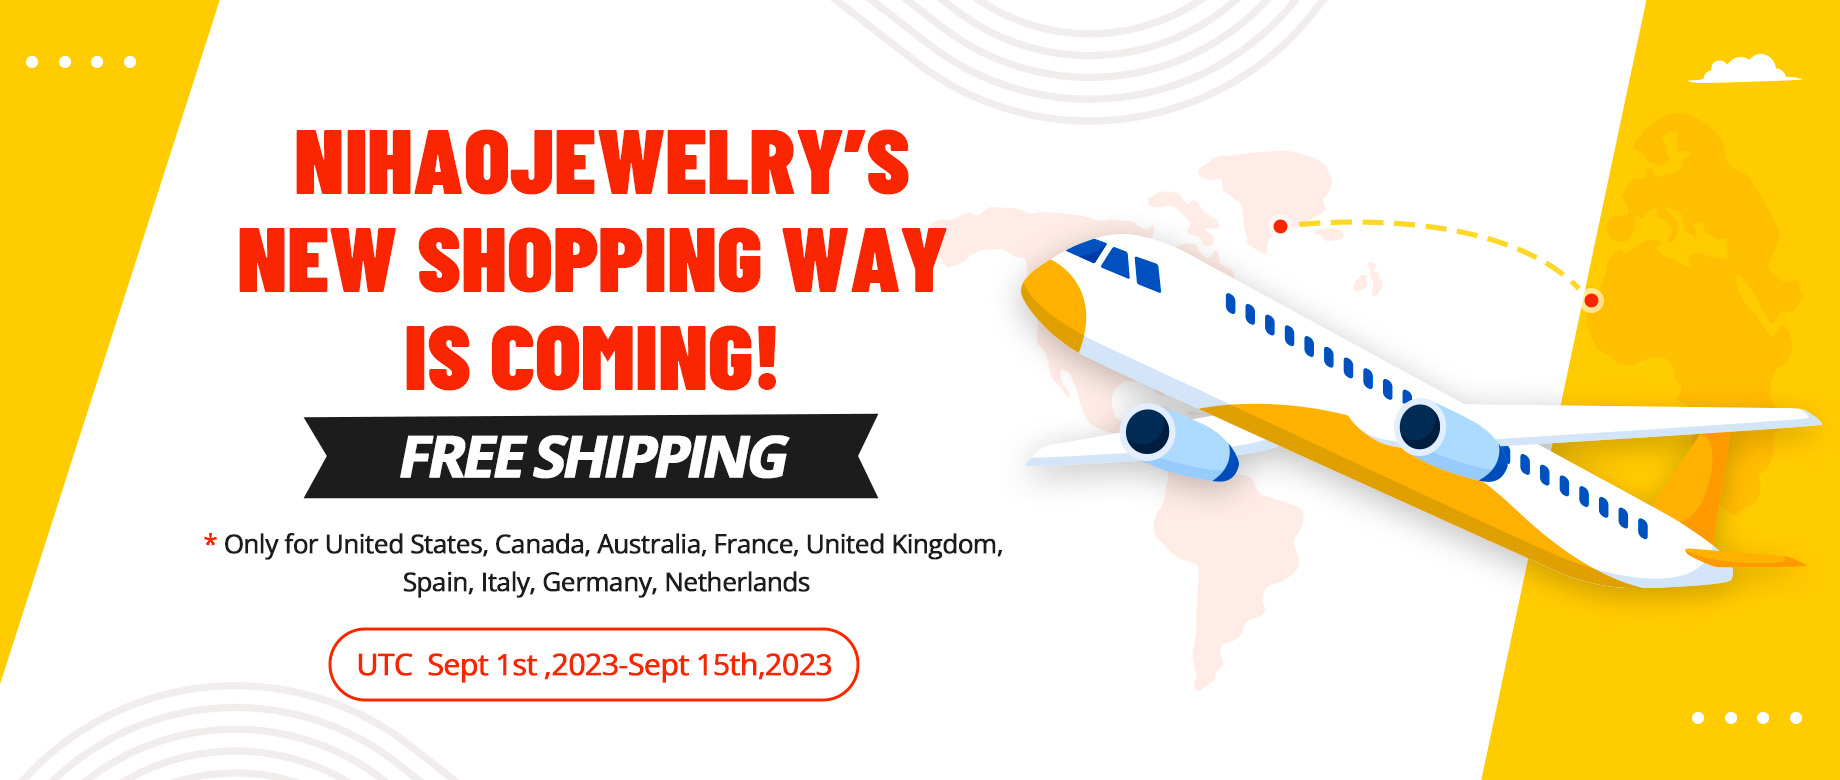 SURPRISE! FREE SHIPPING $0! NIHAOJEWELRY’S NEW SHOPPING WAY IS COMING!